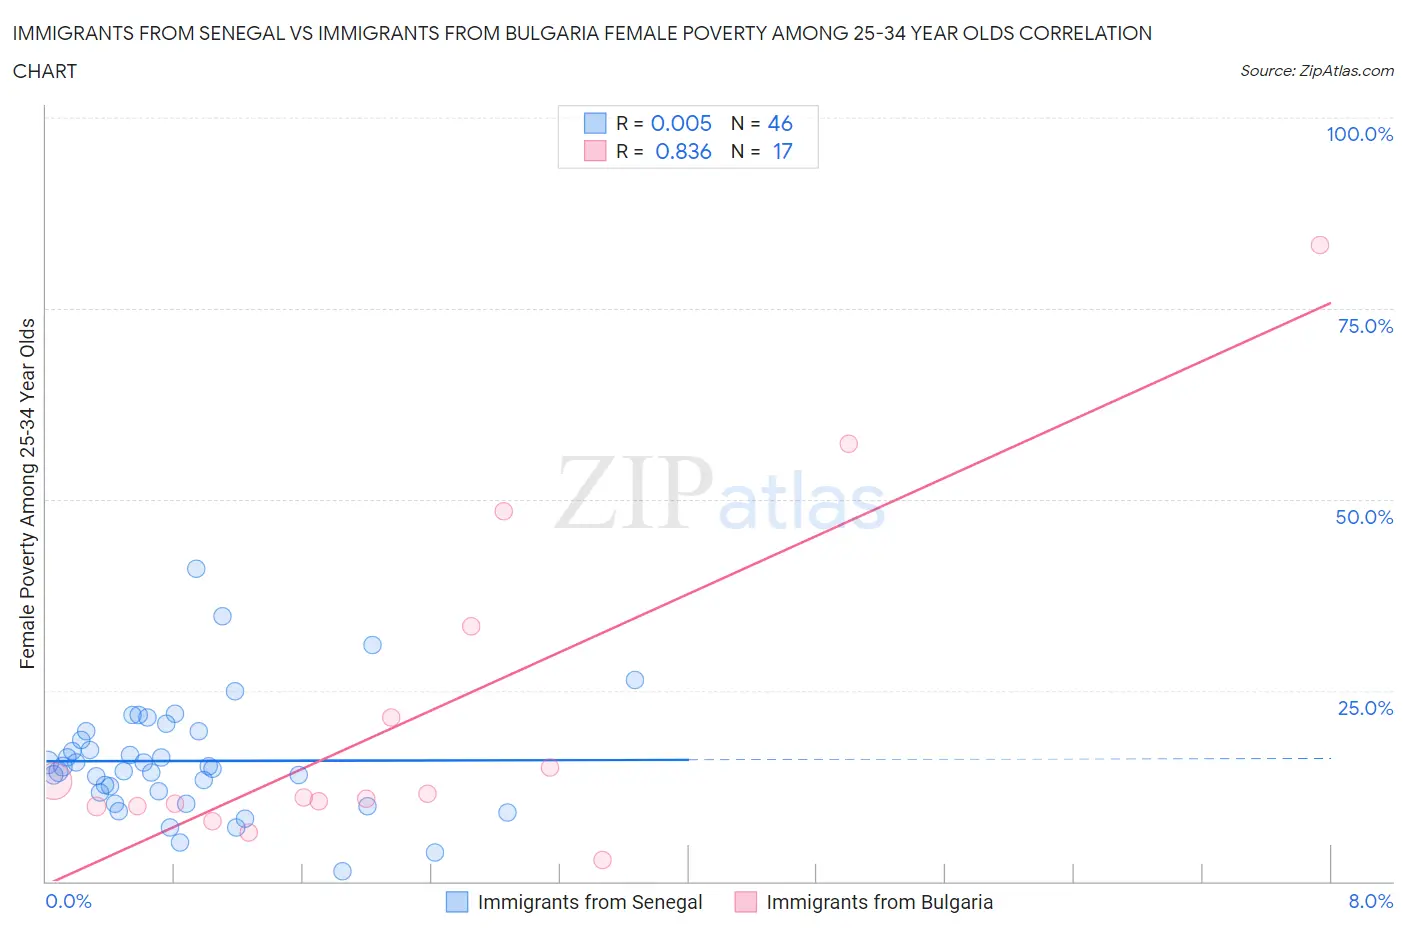 Immigrants from Senegal vs Immigrants from Bulgaria Female Poverty Among 25-34 Year Olds